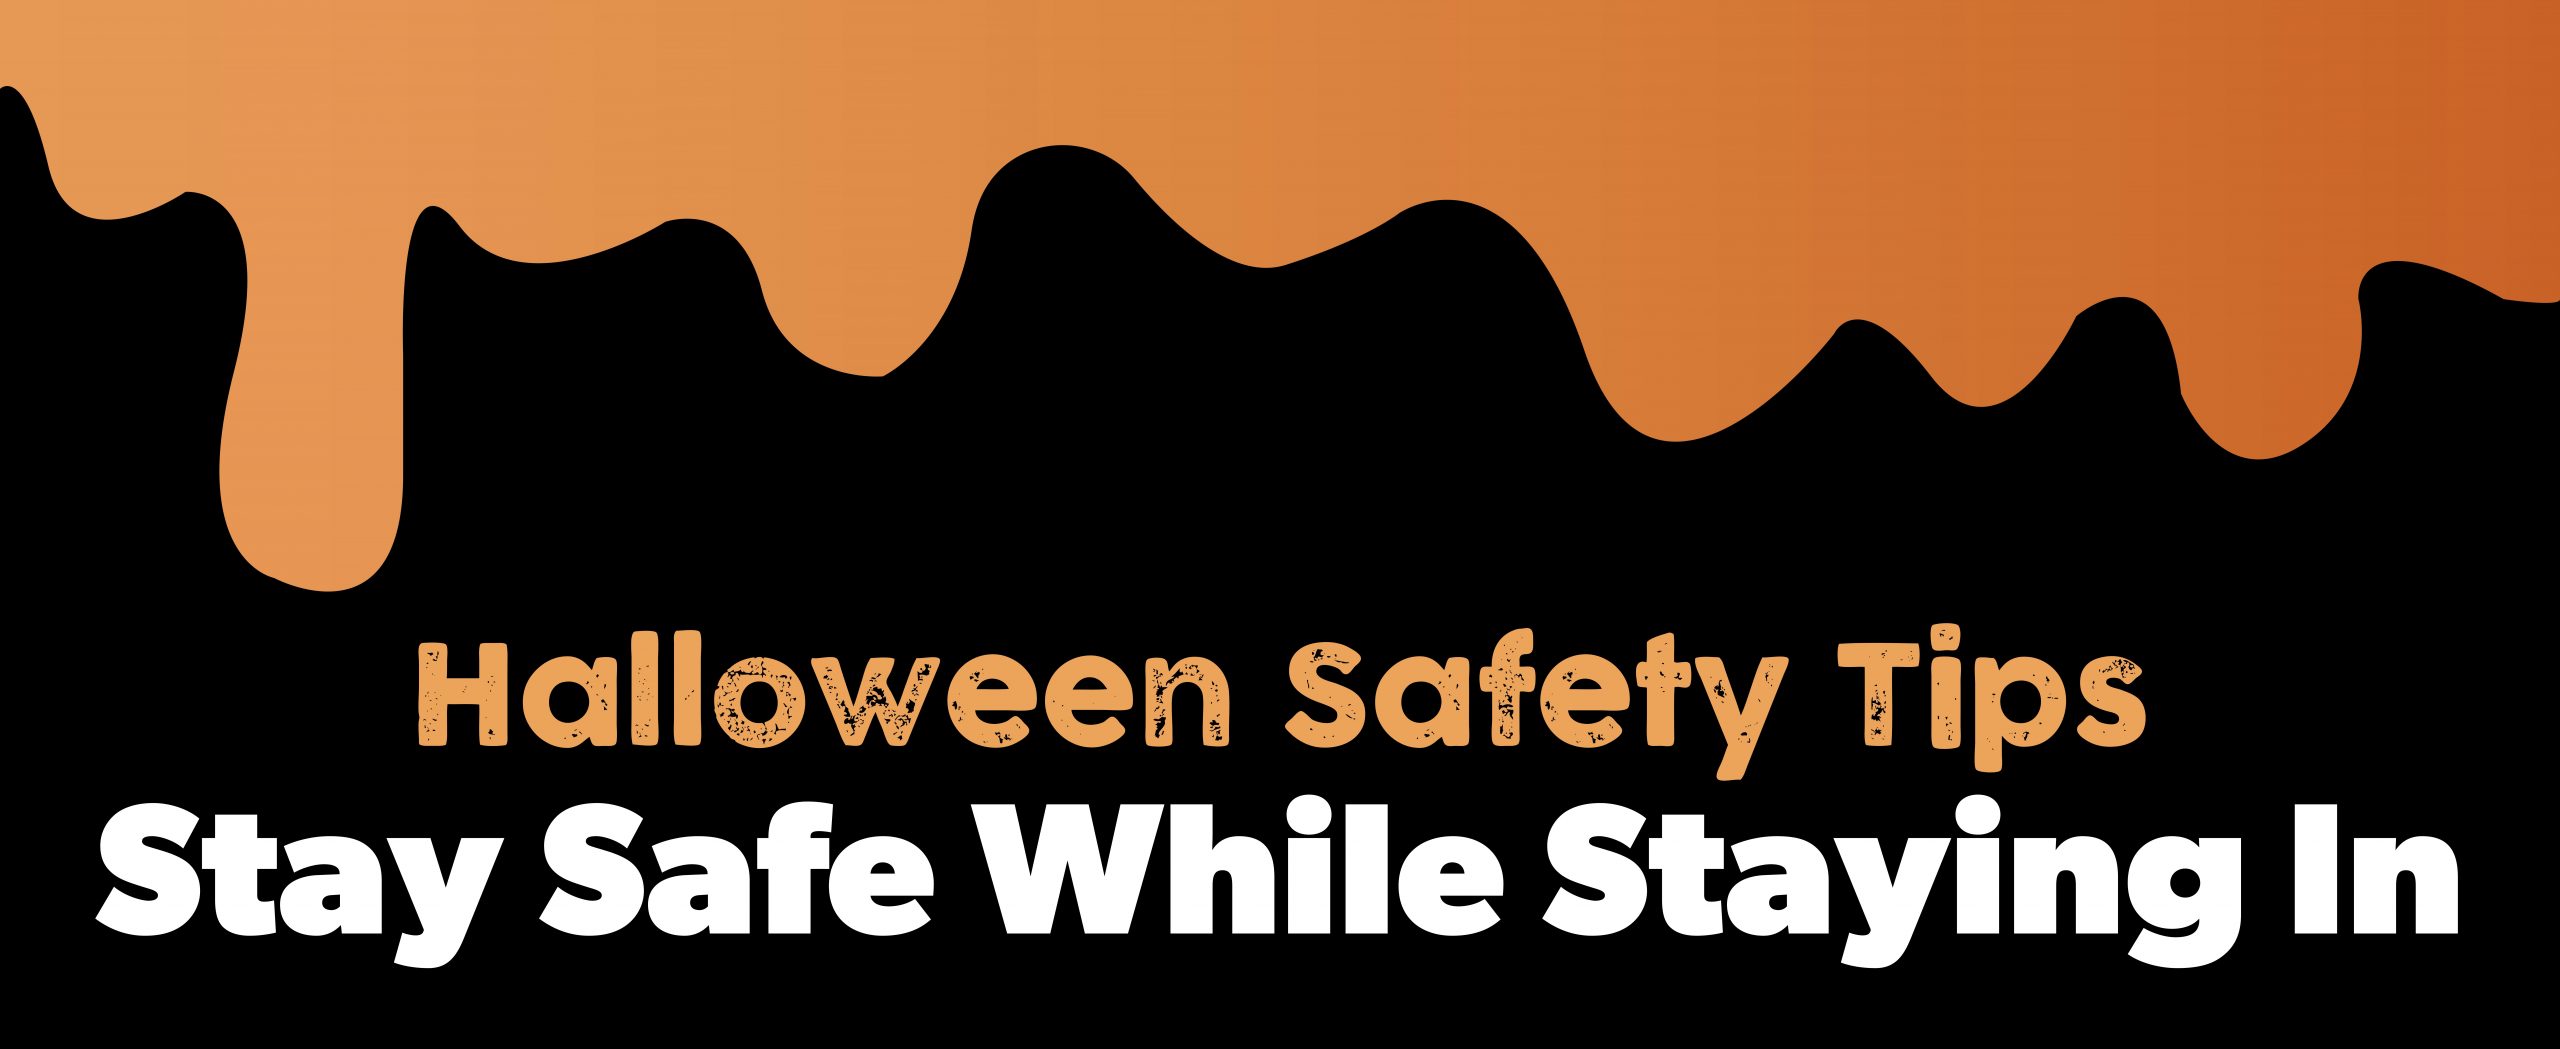 Halloween safety: staying safe while staying in